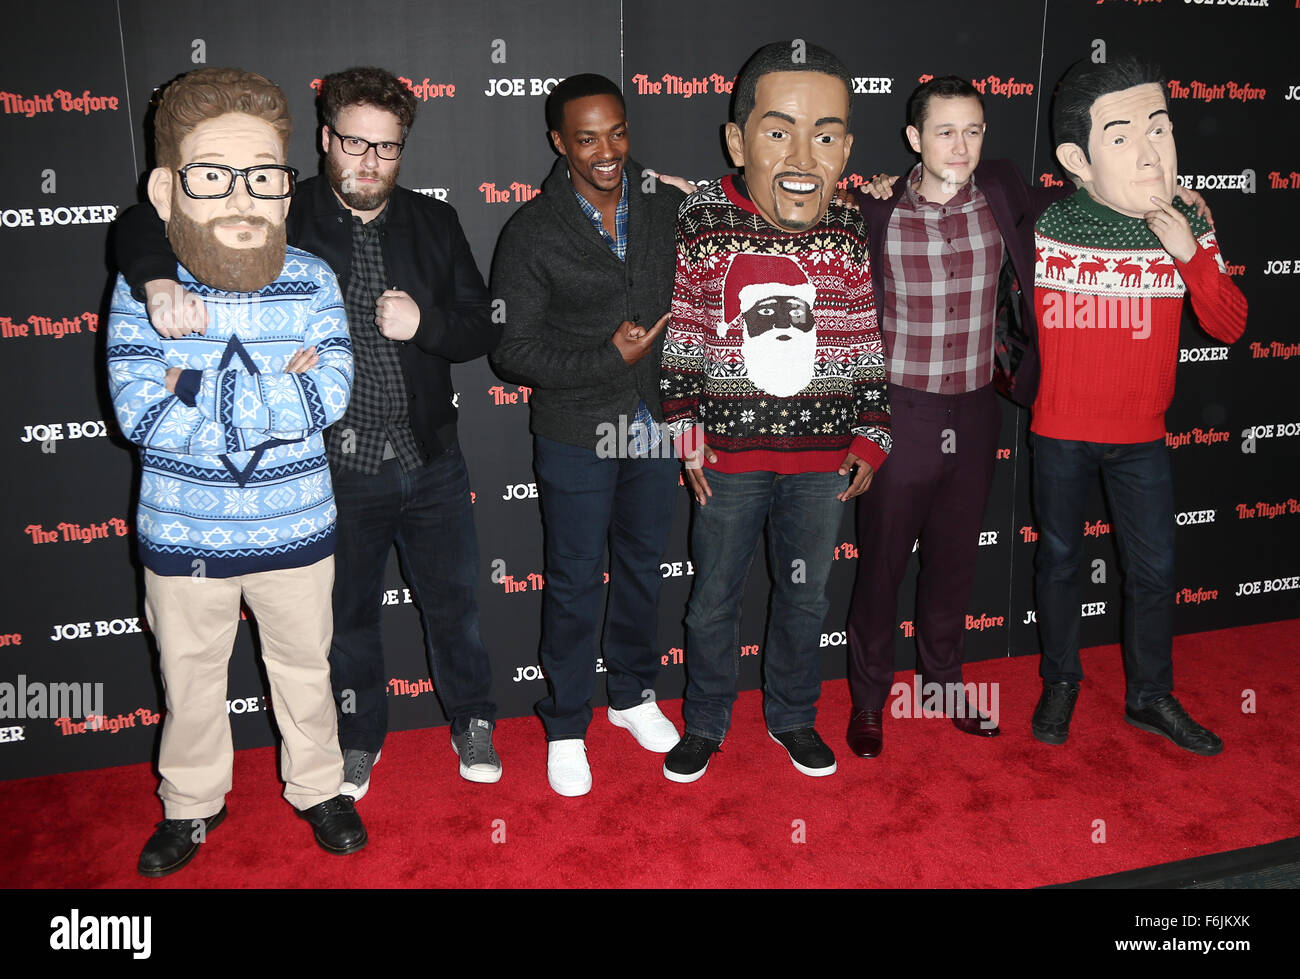 New York, USA. 16th Nov, 2015. (L-R) Actors Seth Rogen, Anthony Mackie and Joseph Gordon-Levitt attend the New York Red Carpet screening of Columbia Pictures' 'The Night Before' at the Landmark Sunshine Theater on November 16, 2015 in New York City. Stock Photo